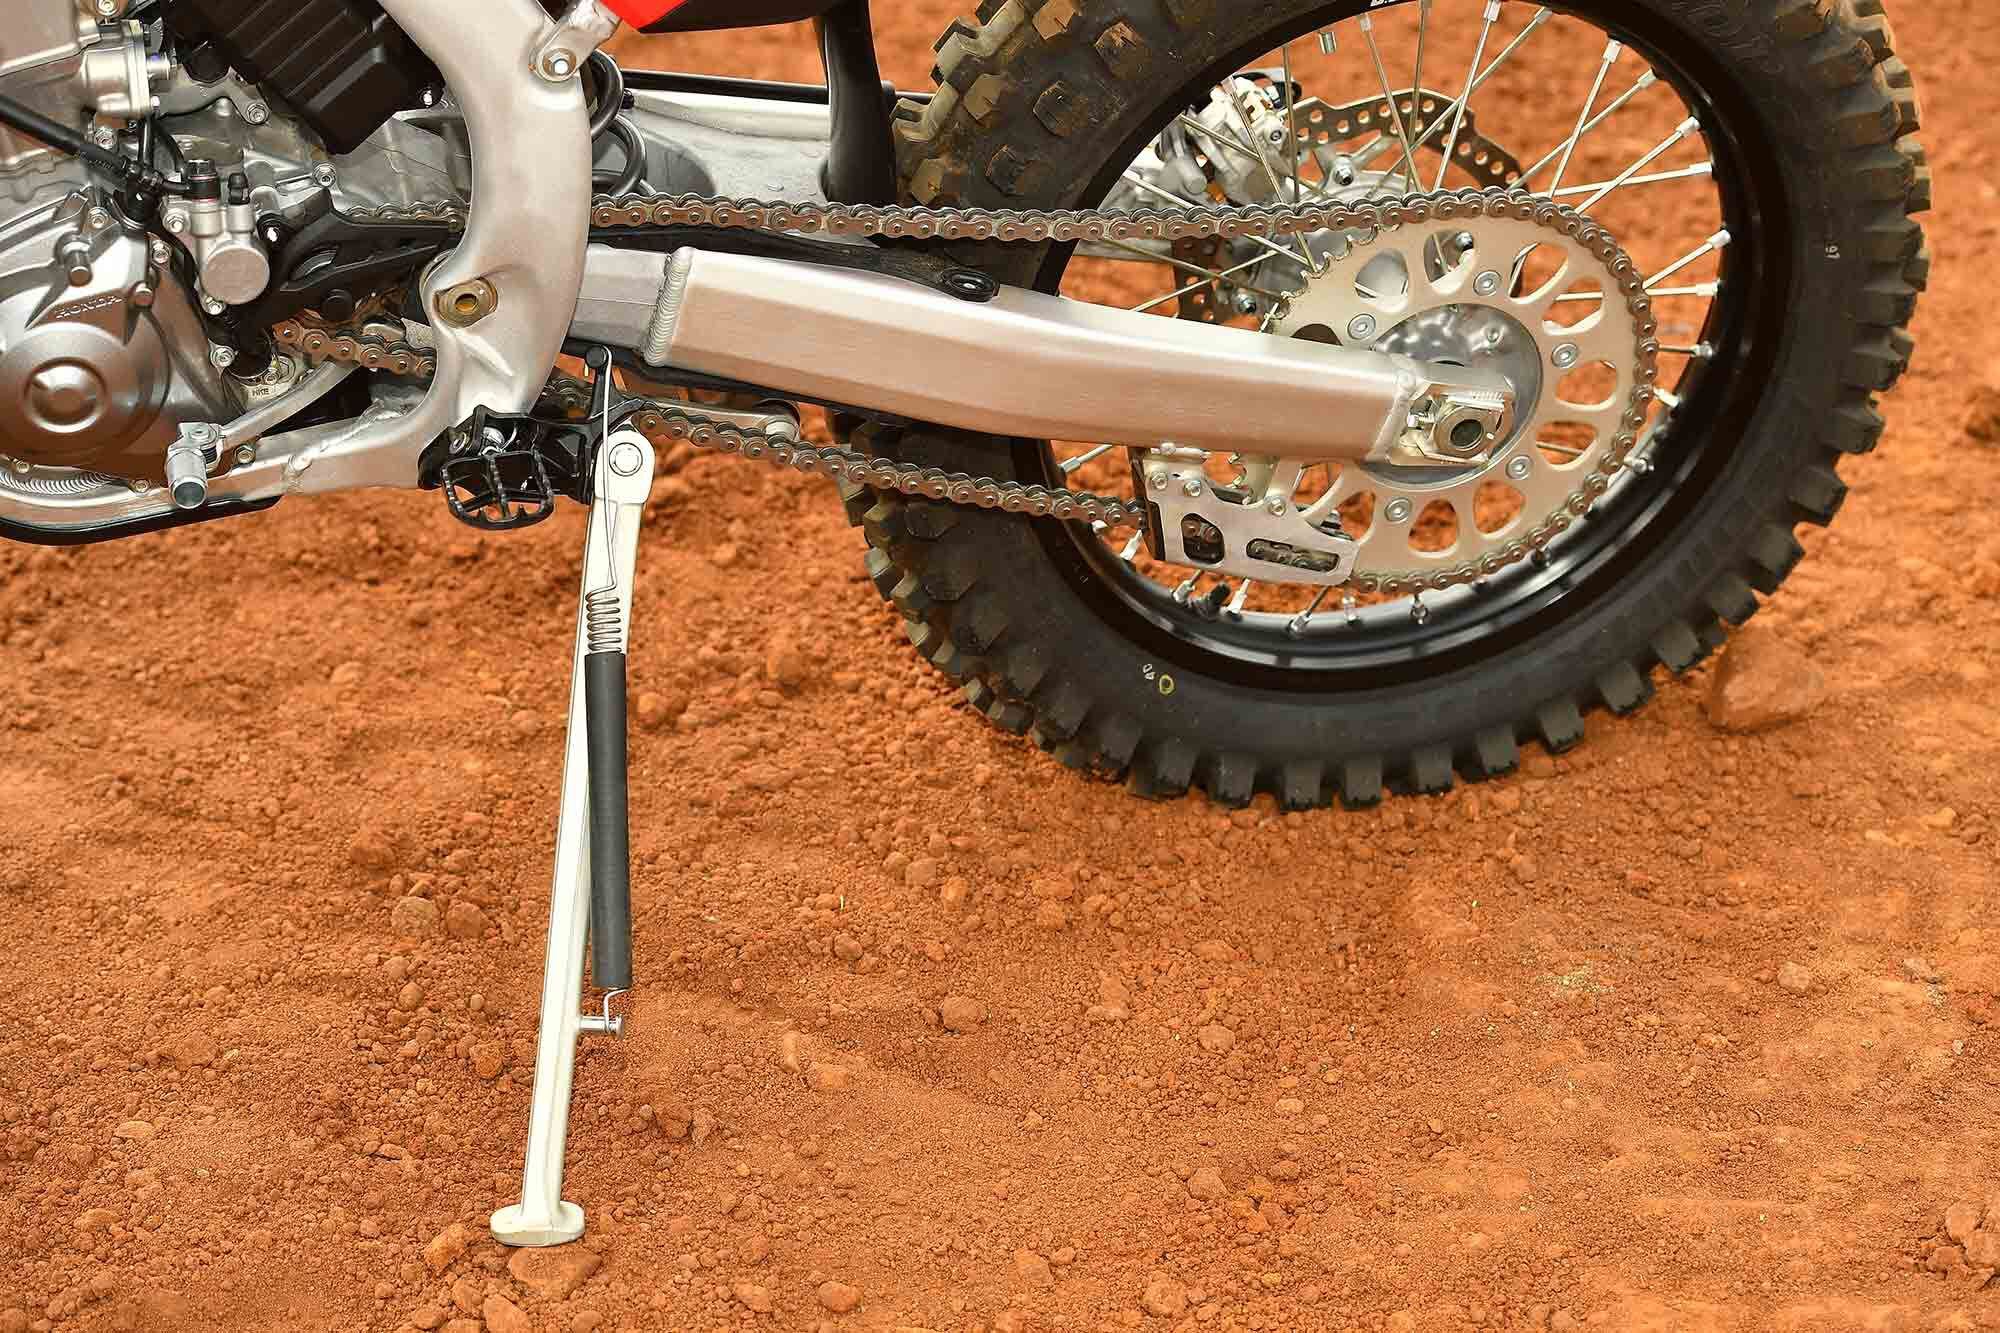 A proper kickstand makes the CRF450RX off-road ready. For racers needing to remove it for varying reasons, the CRF450R footpeg bracket is a direct fit. Both bikes utilize the same footpegs. The step bracket part number is 50611-MEN-B10.